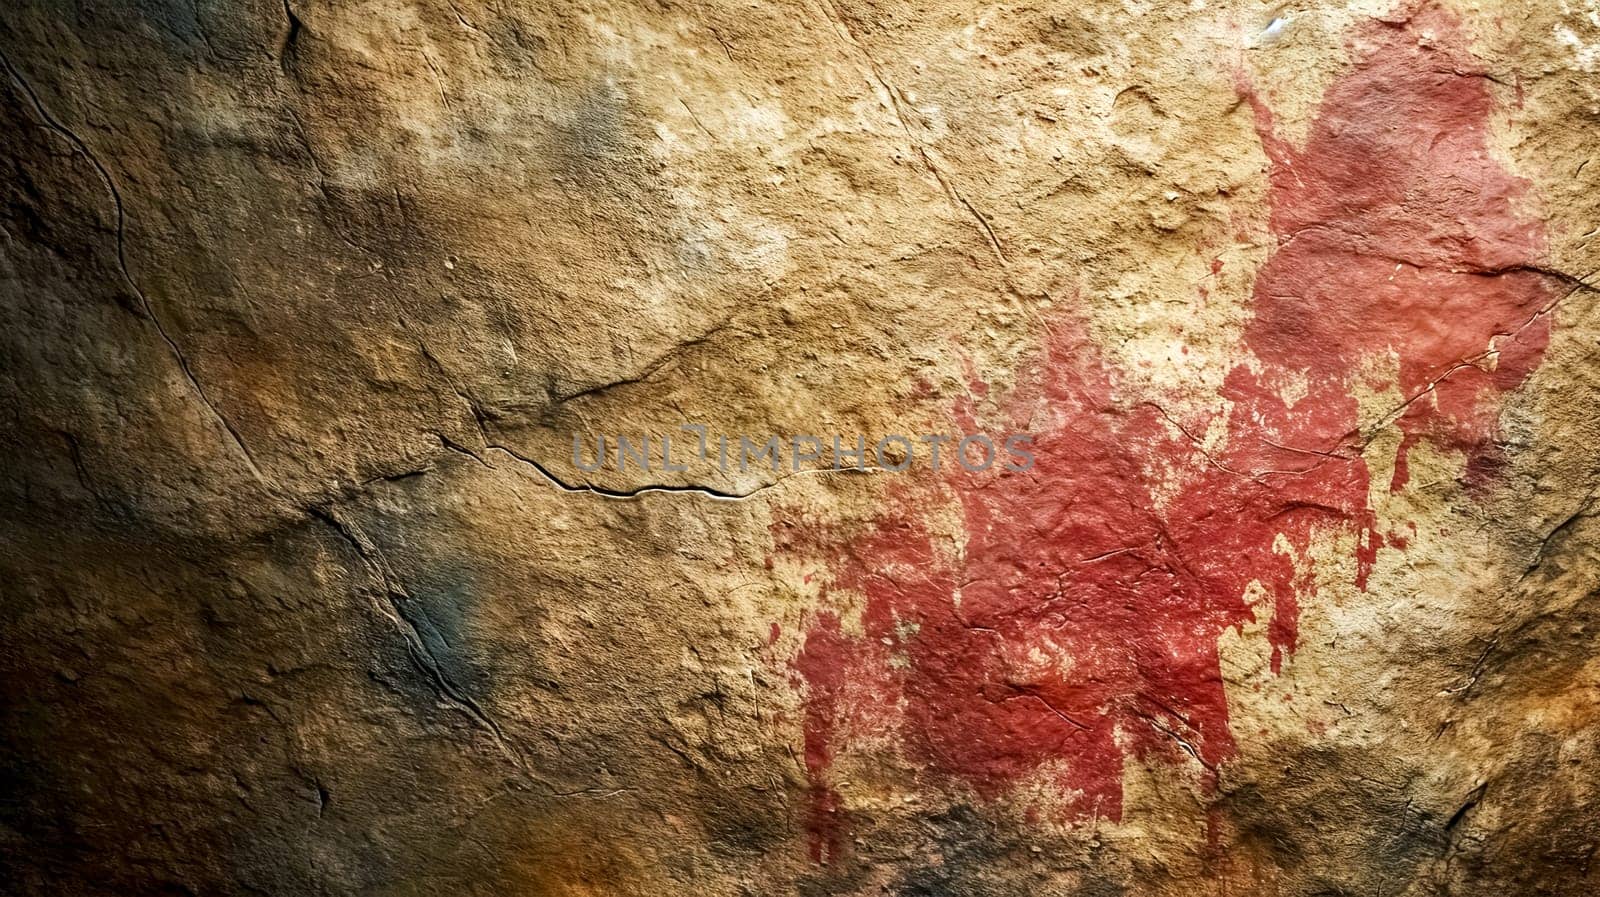 what appears to be an ancient cave painting, featuring a red ochre handprint on a natural stone surface, suggesting a human presence and activity from a bygone era. by Edophoto